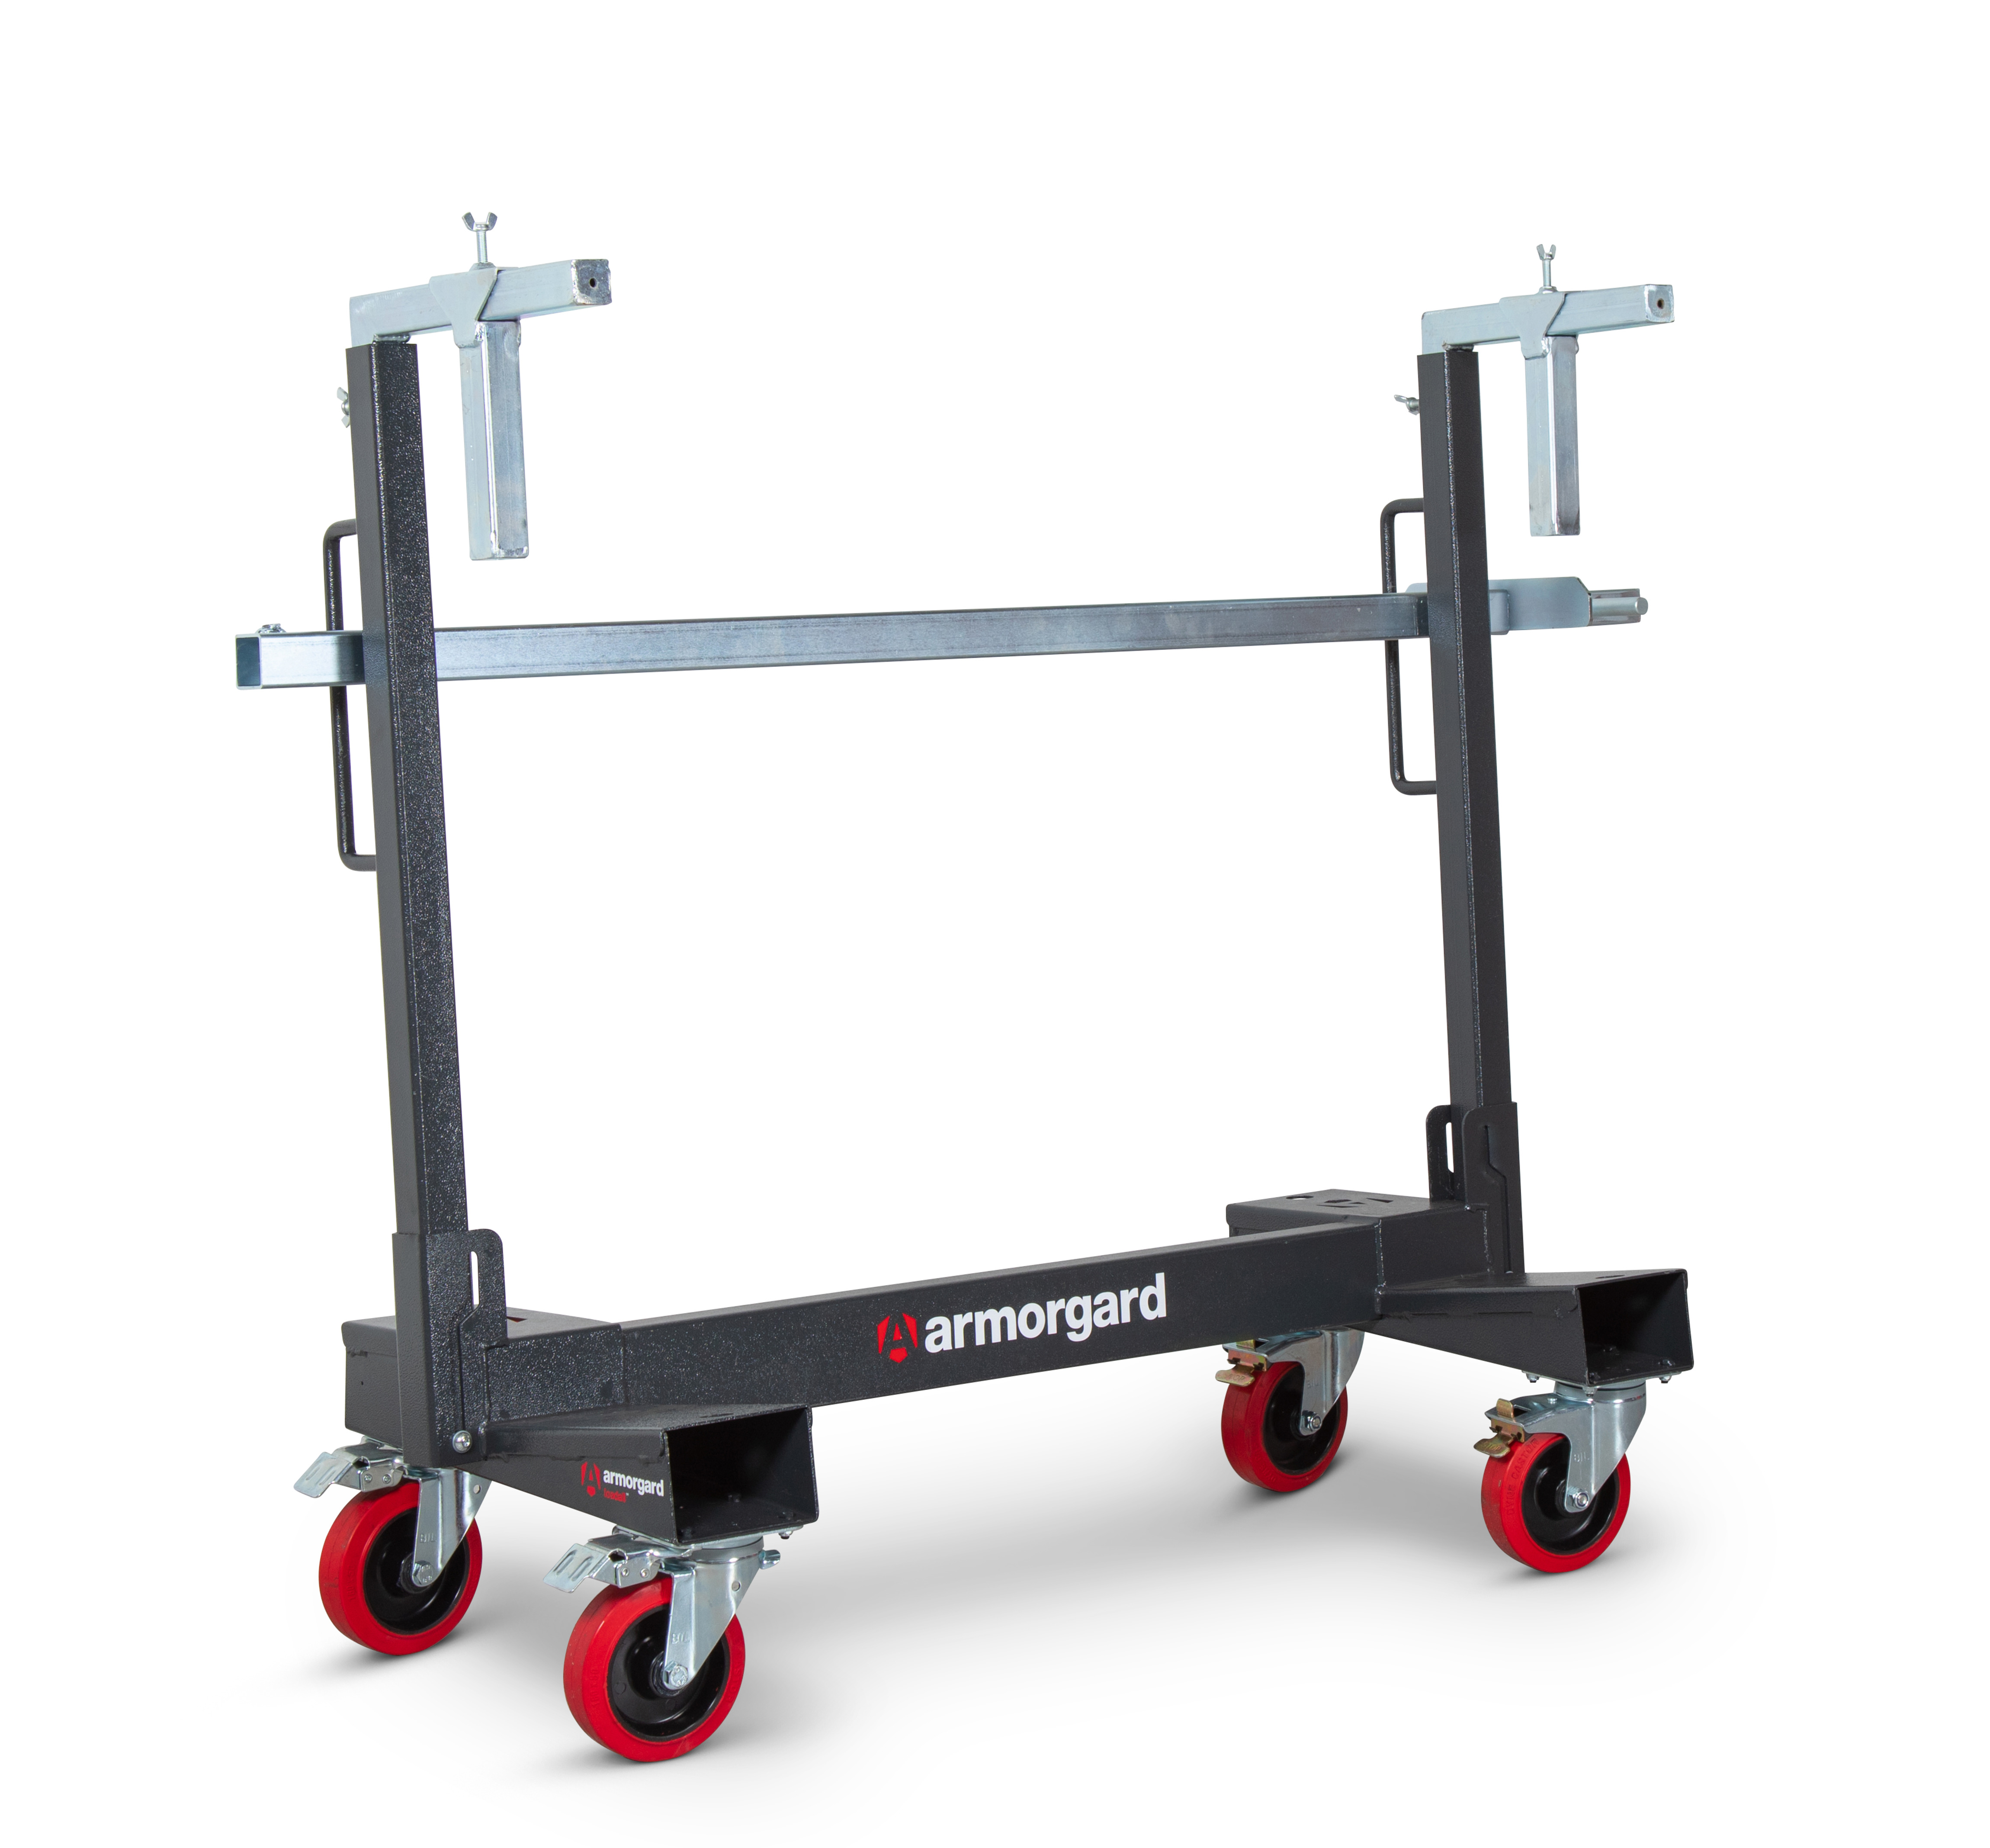 Loadall Trolley 750kg Capacity with Handle and Clamps